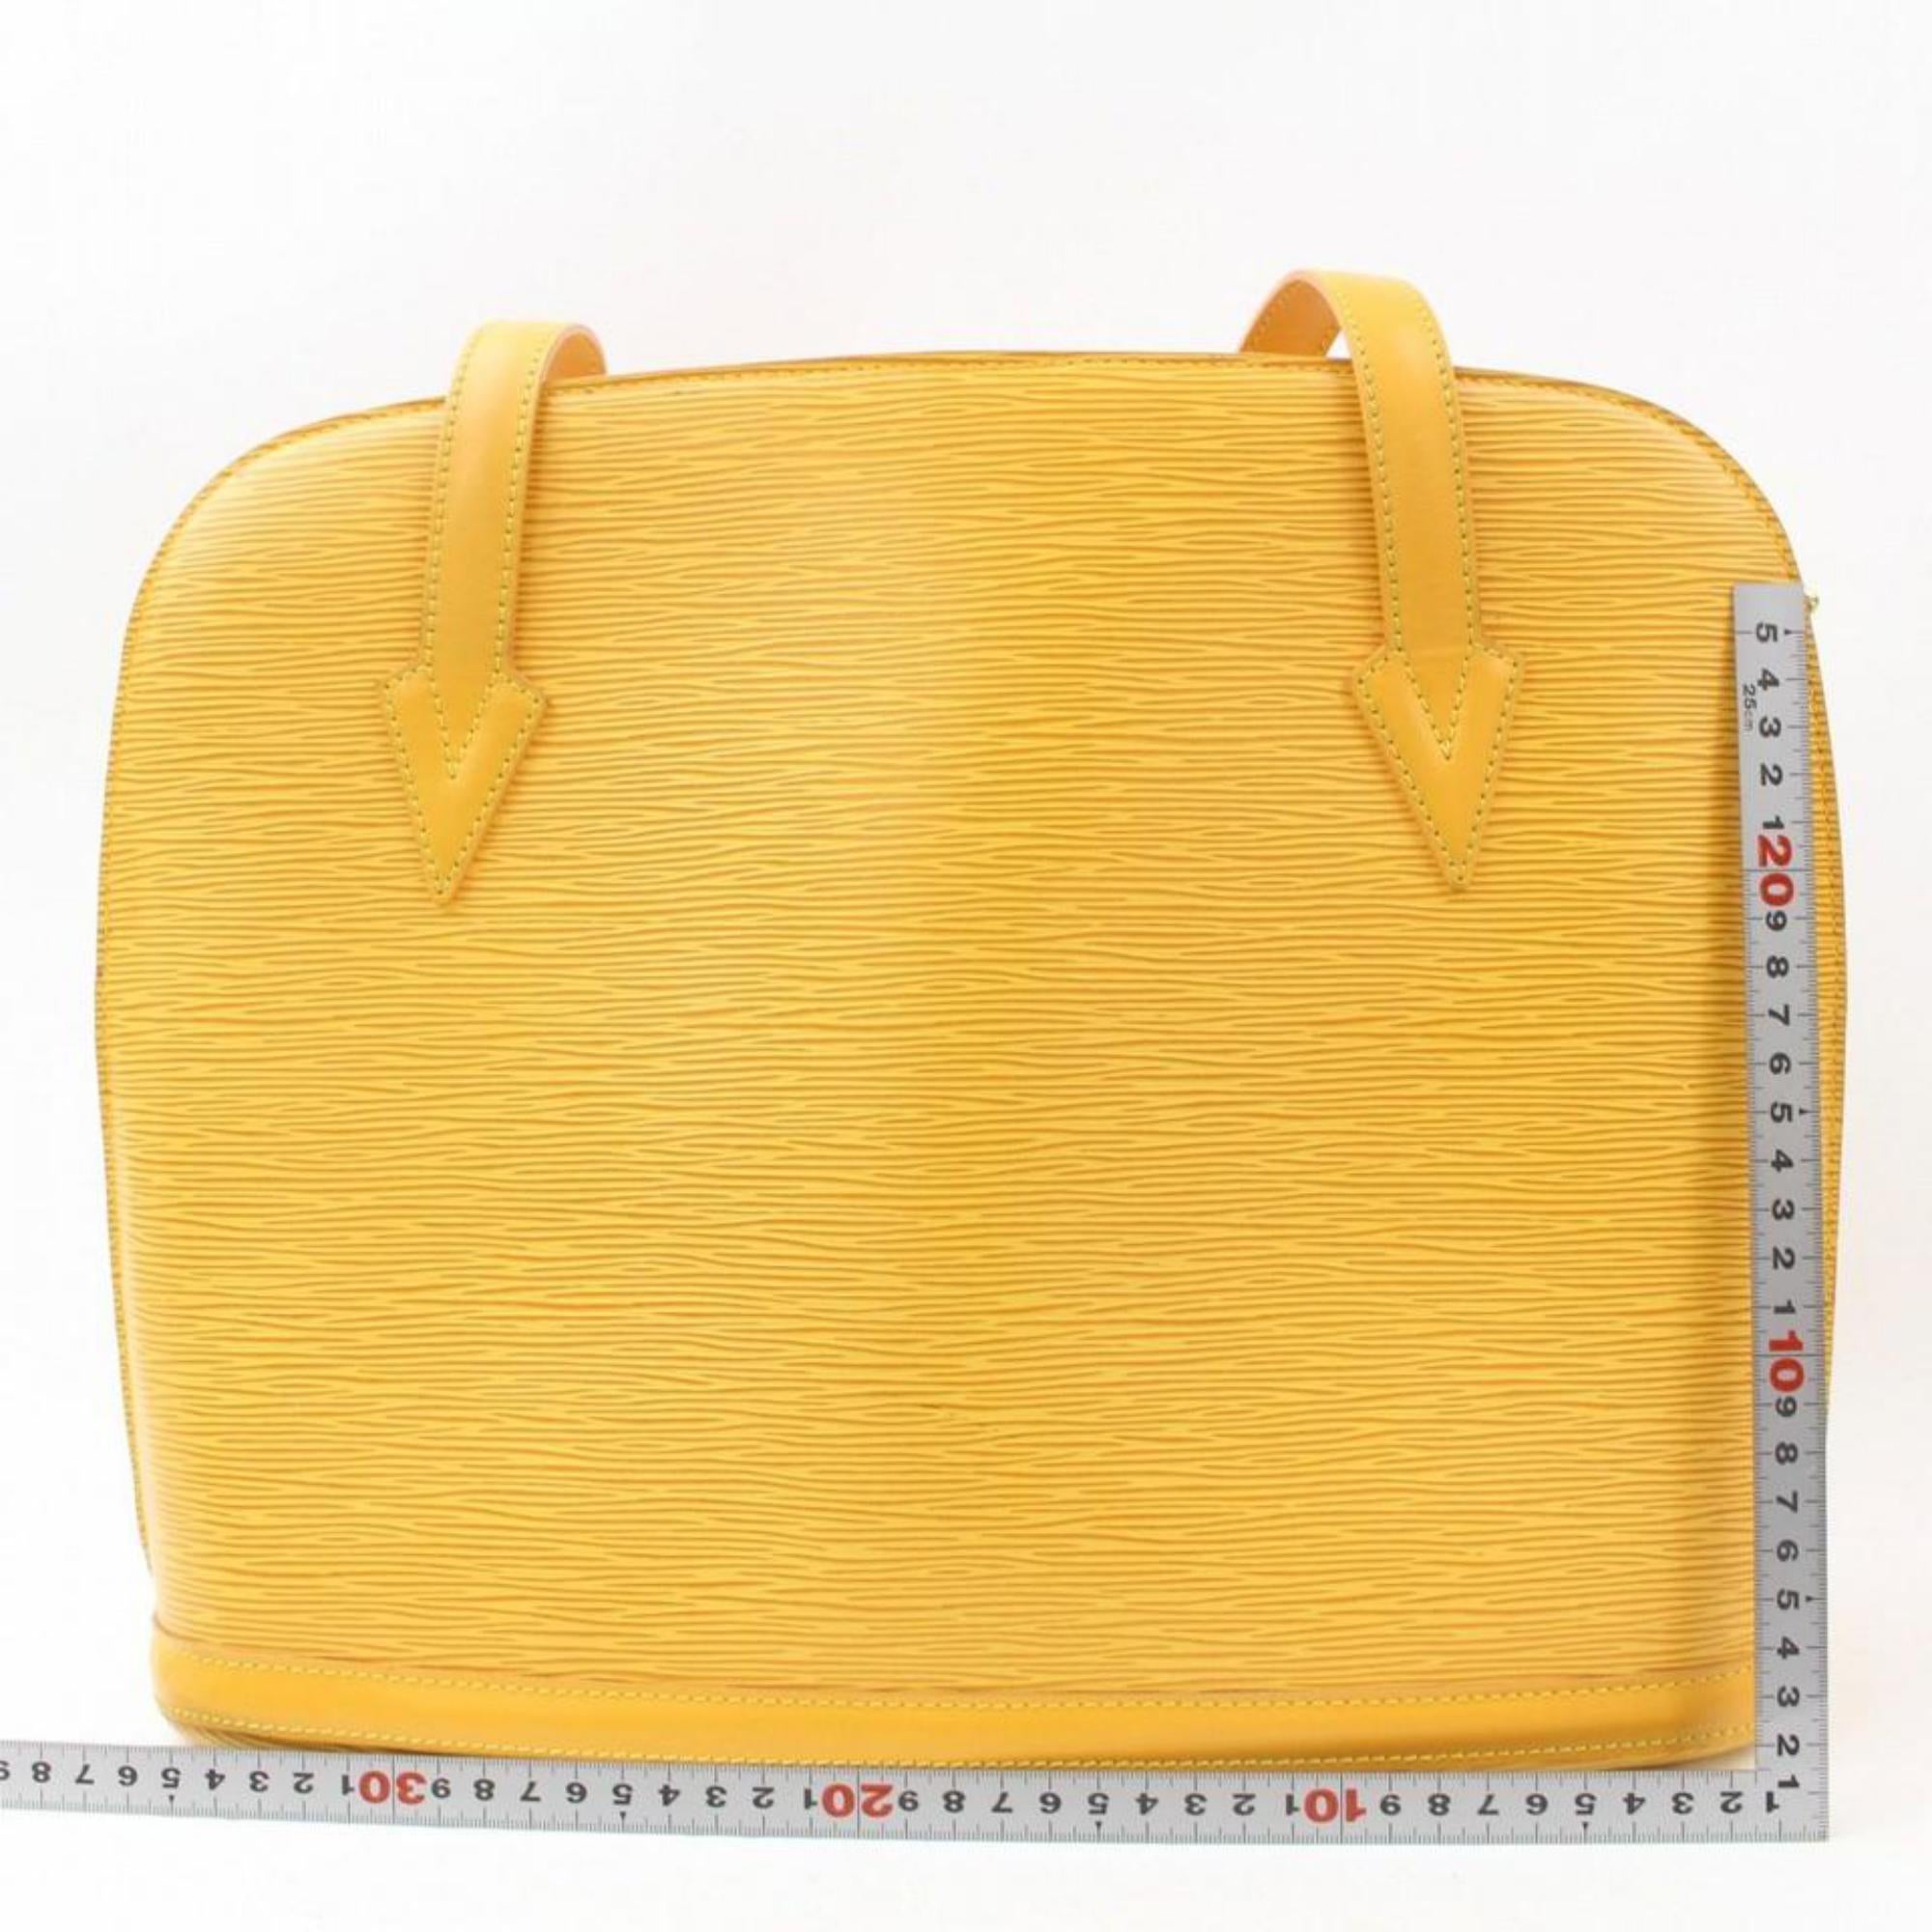 Louis Vuitton Lussac Zip Tote 869777 Yellow Leather Shoulder Bag For Sale 2